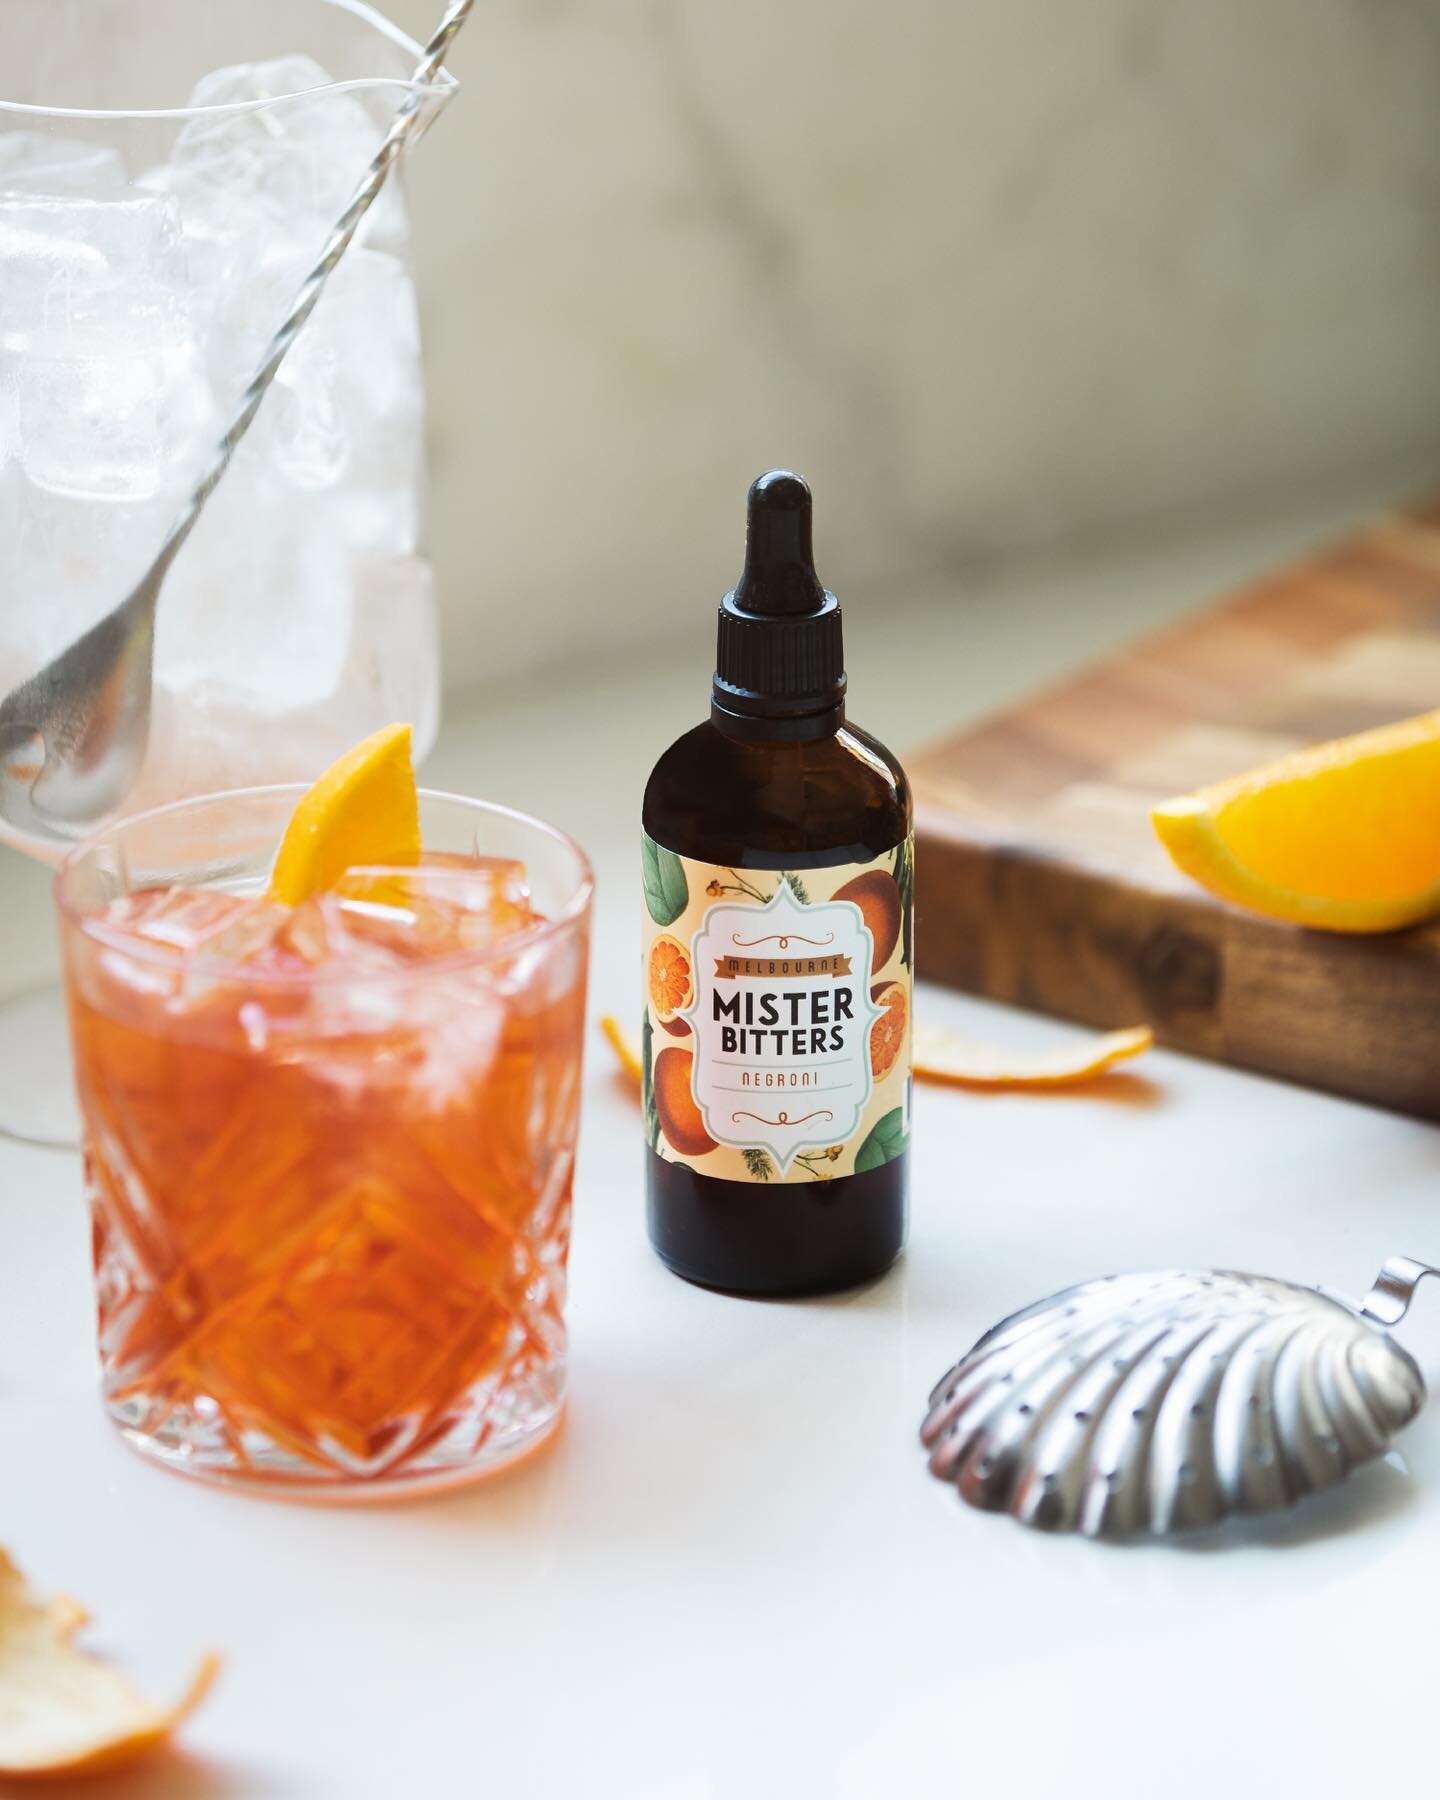 Mister Bitters Negroni: Recommended with all classic and contemporary cocktails that call for a dash or two of &lsquo;orange bitters&rsquo;. A classic cure-all, floral, complex, spicy, and zesty. 

#betterwithbitters